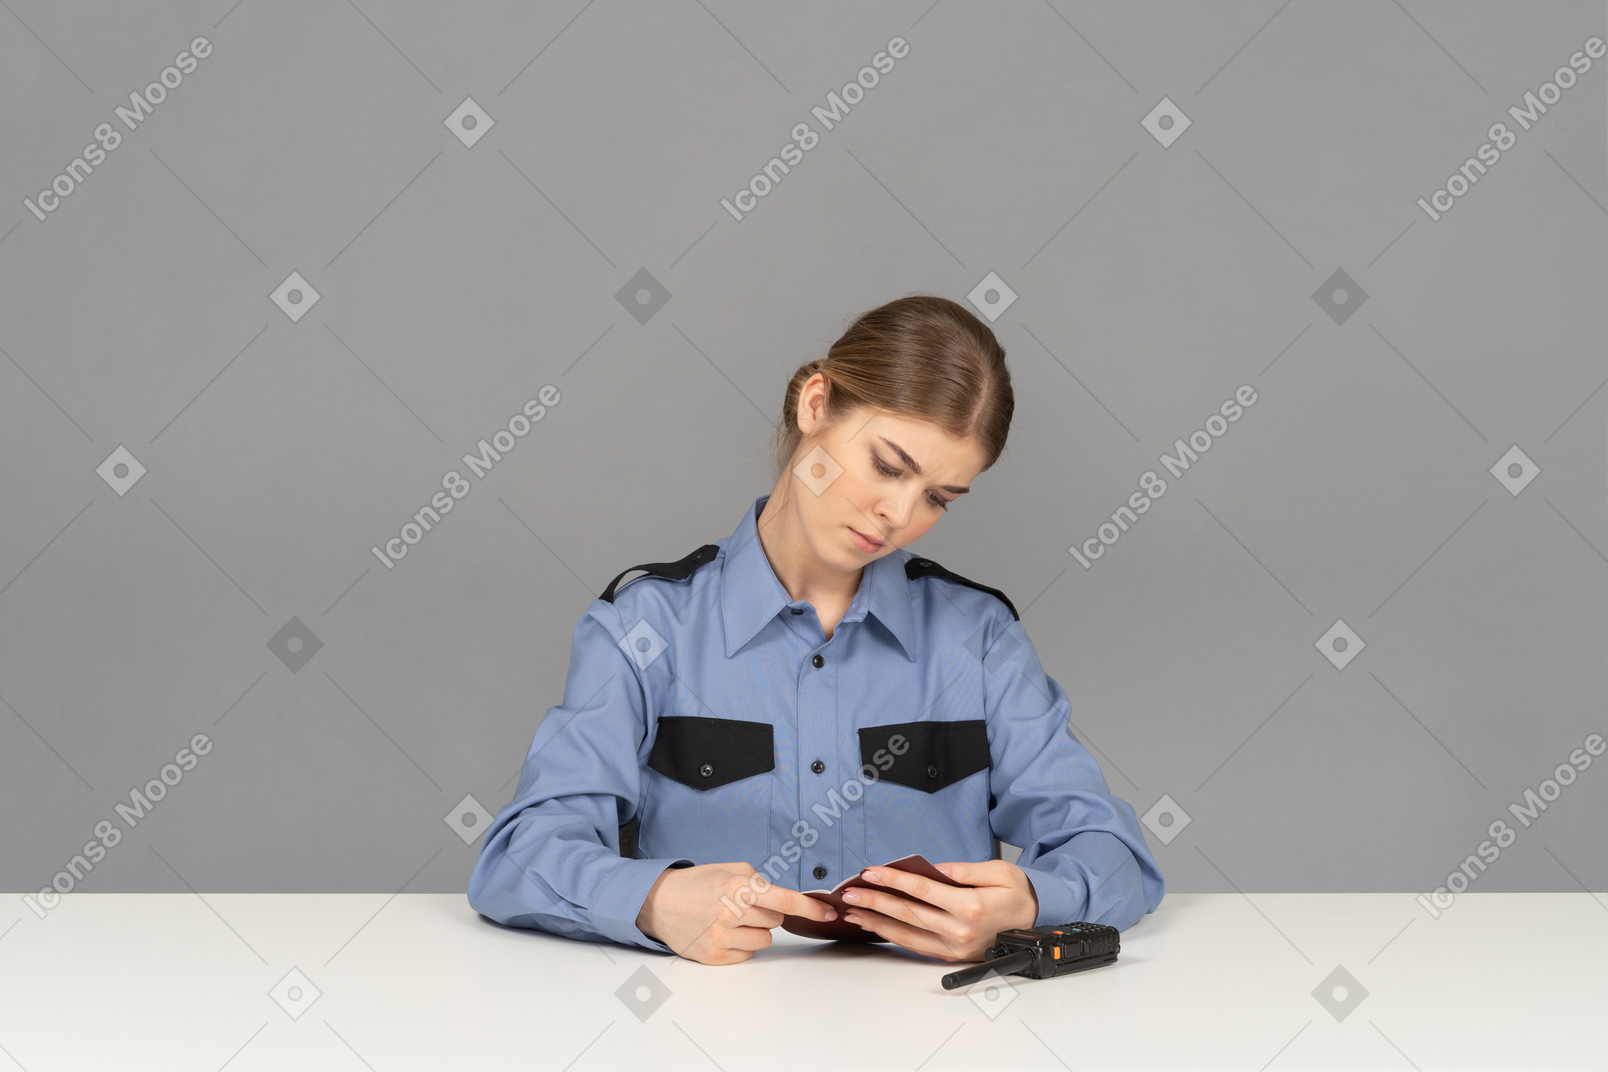 A young female security guard using a mobile phone